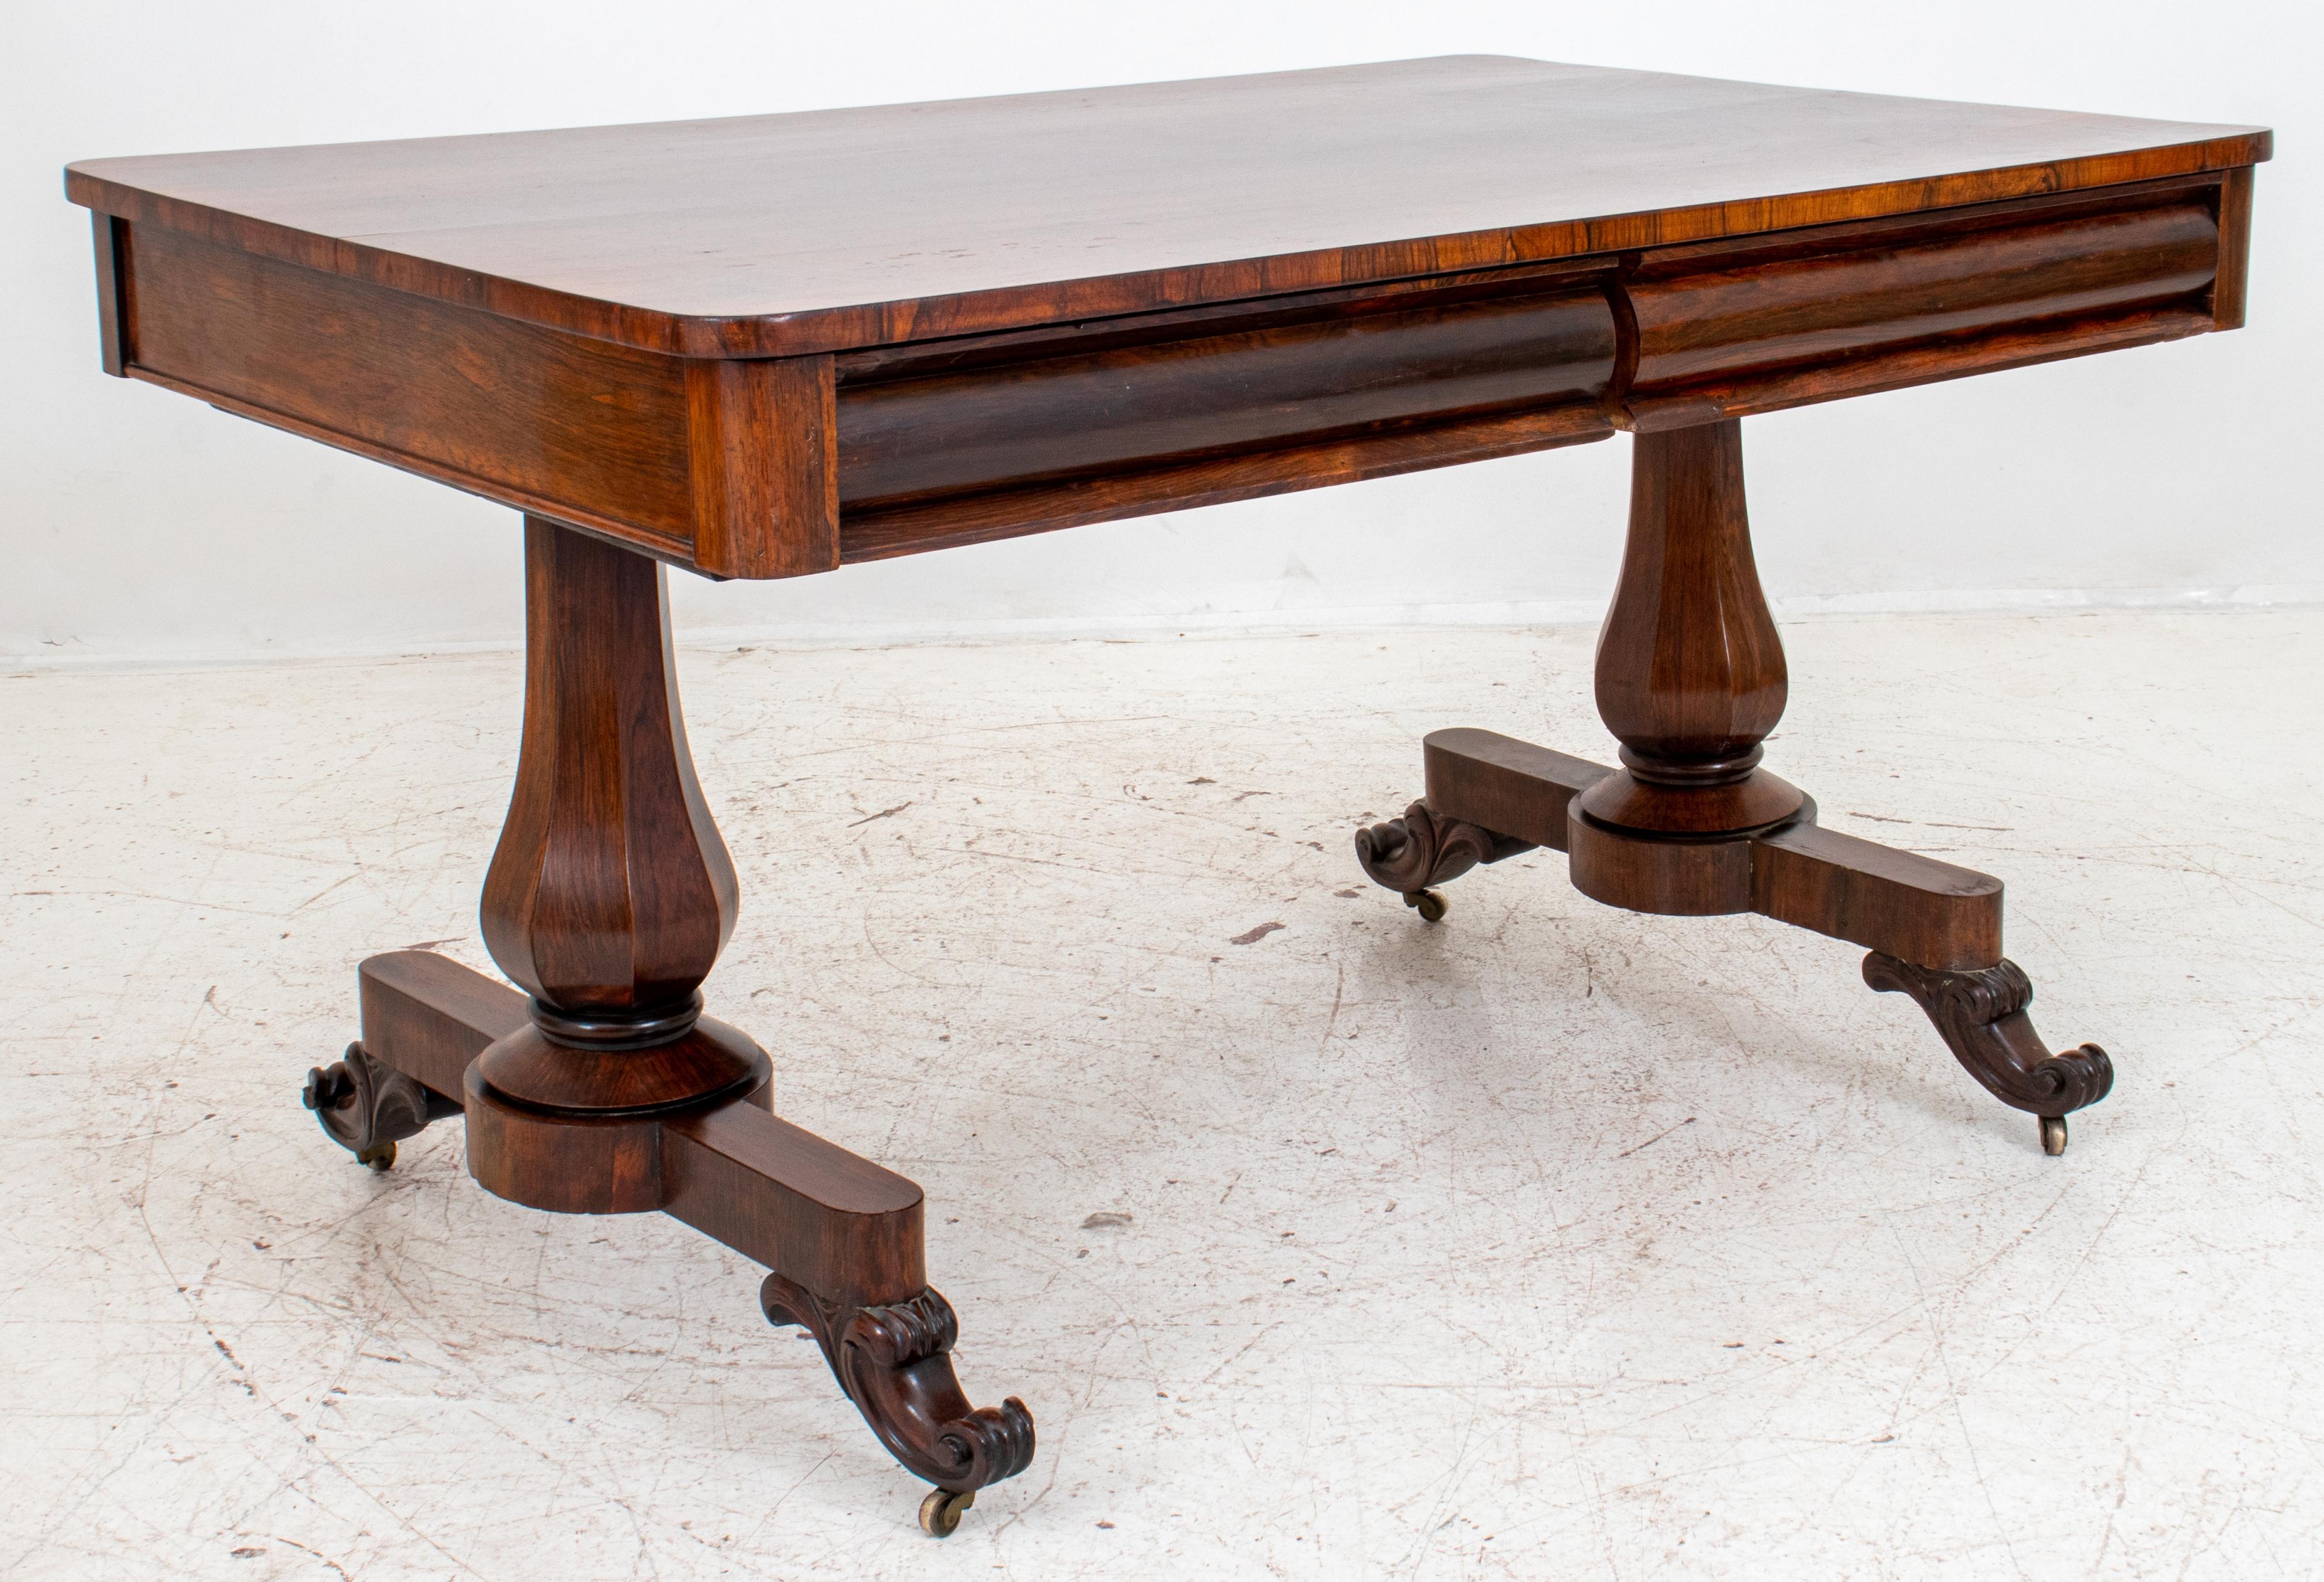 William IV style rosewood library table or partners desk, rectangular, the apron concealing four drawers behind convex rounds on two hexagonal baluster supports on splayed legs terminating in brass casters. Measures: 29